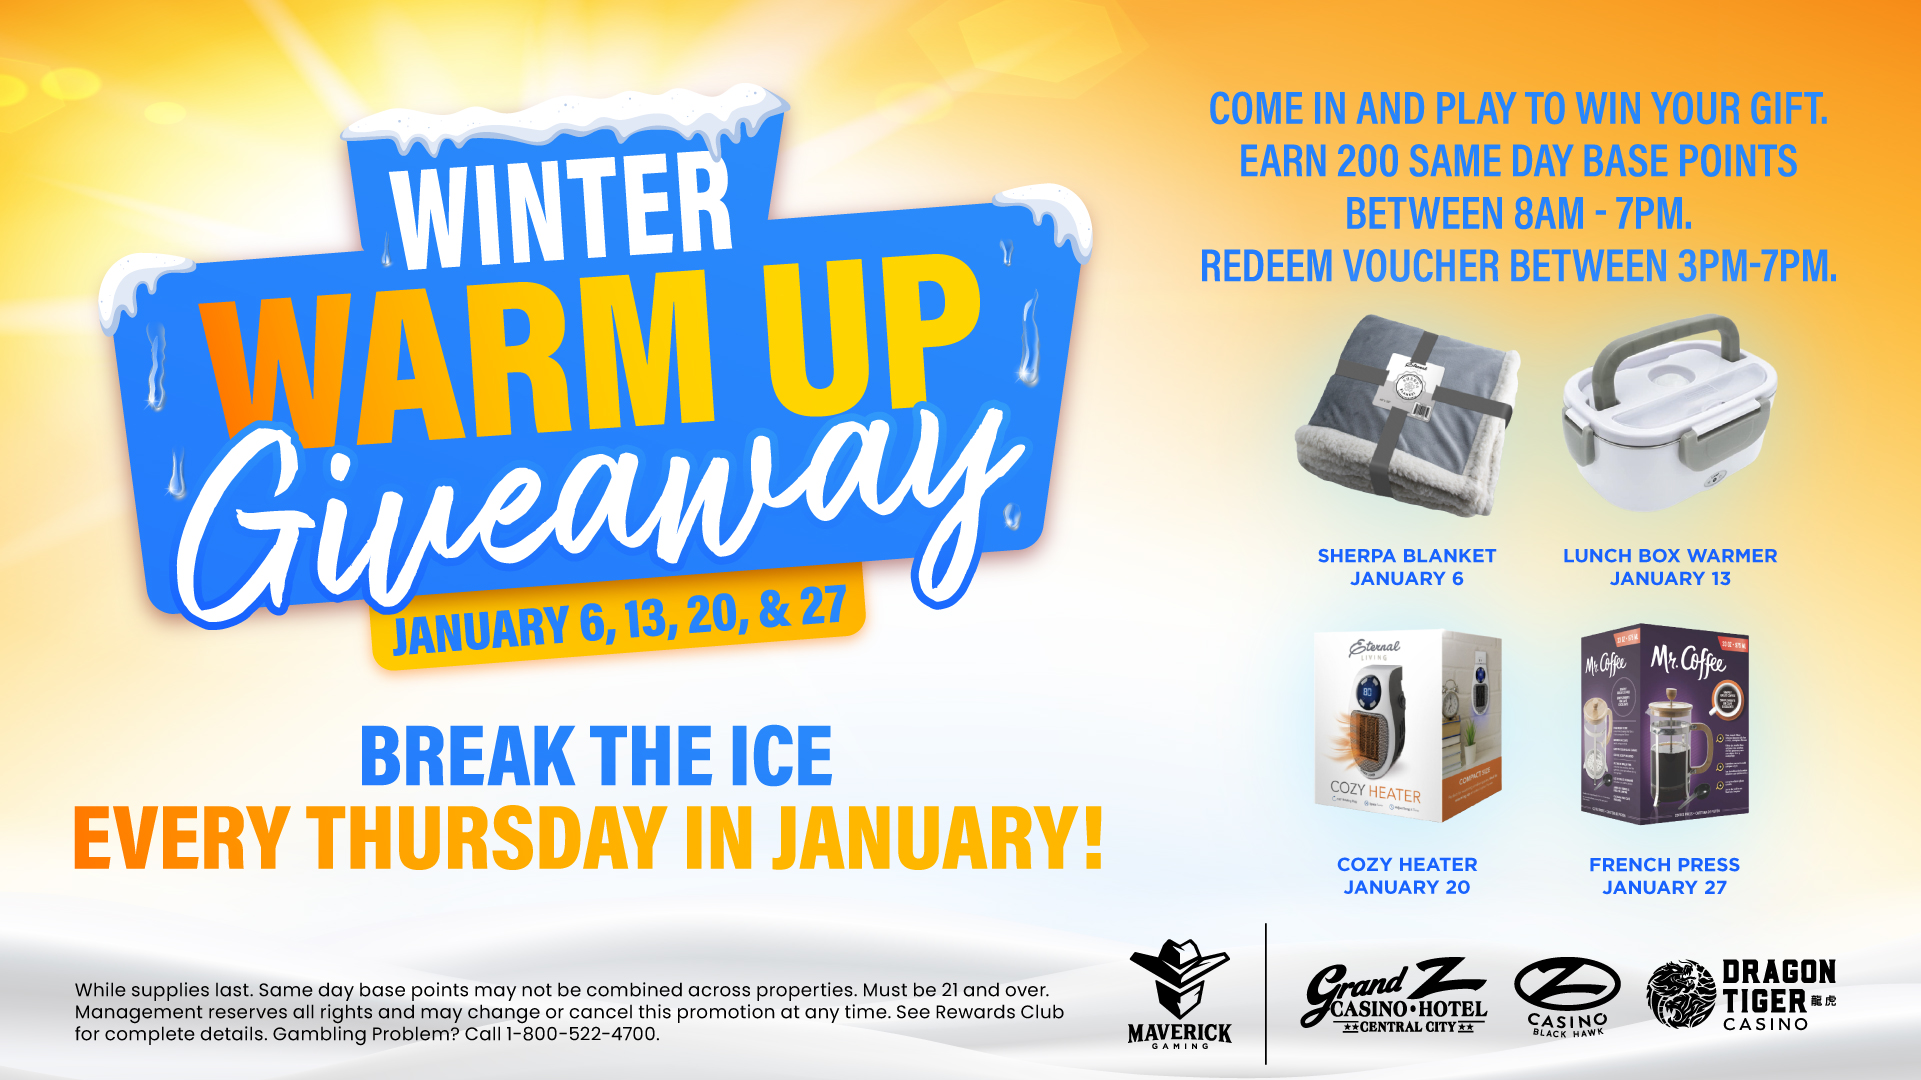 Winter Warm Up Giveaway